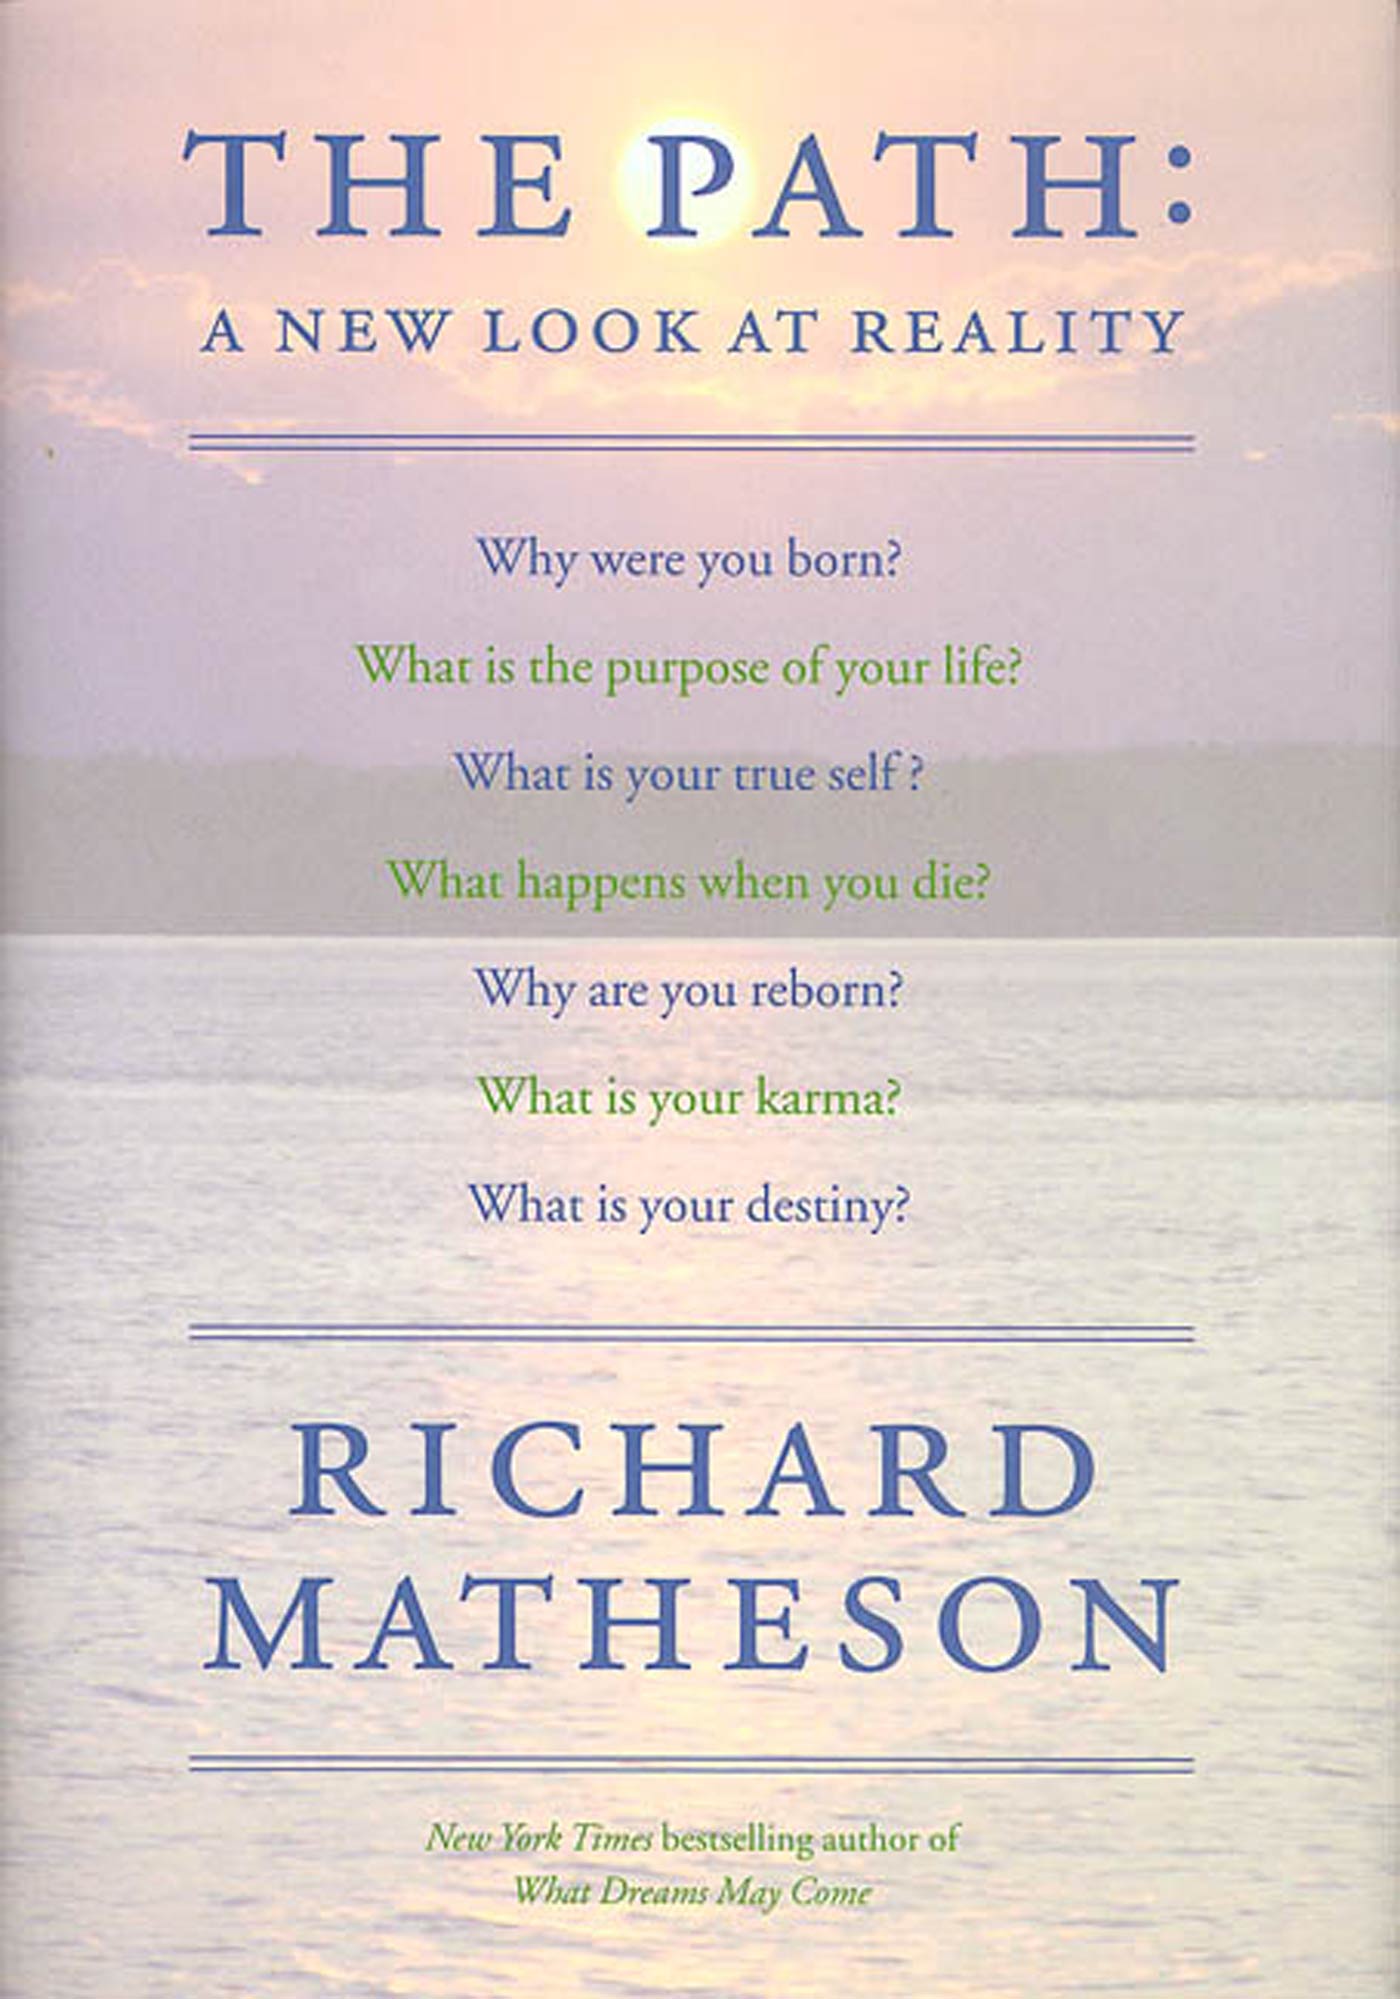 The Path : A New Look At Reality by Richard Matheson